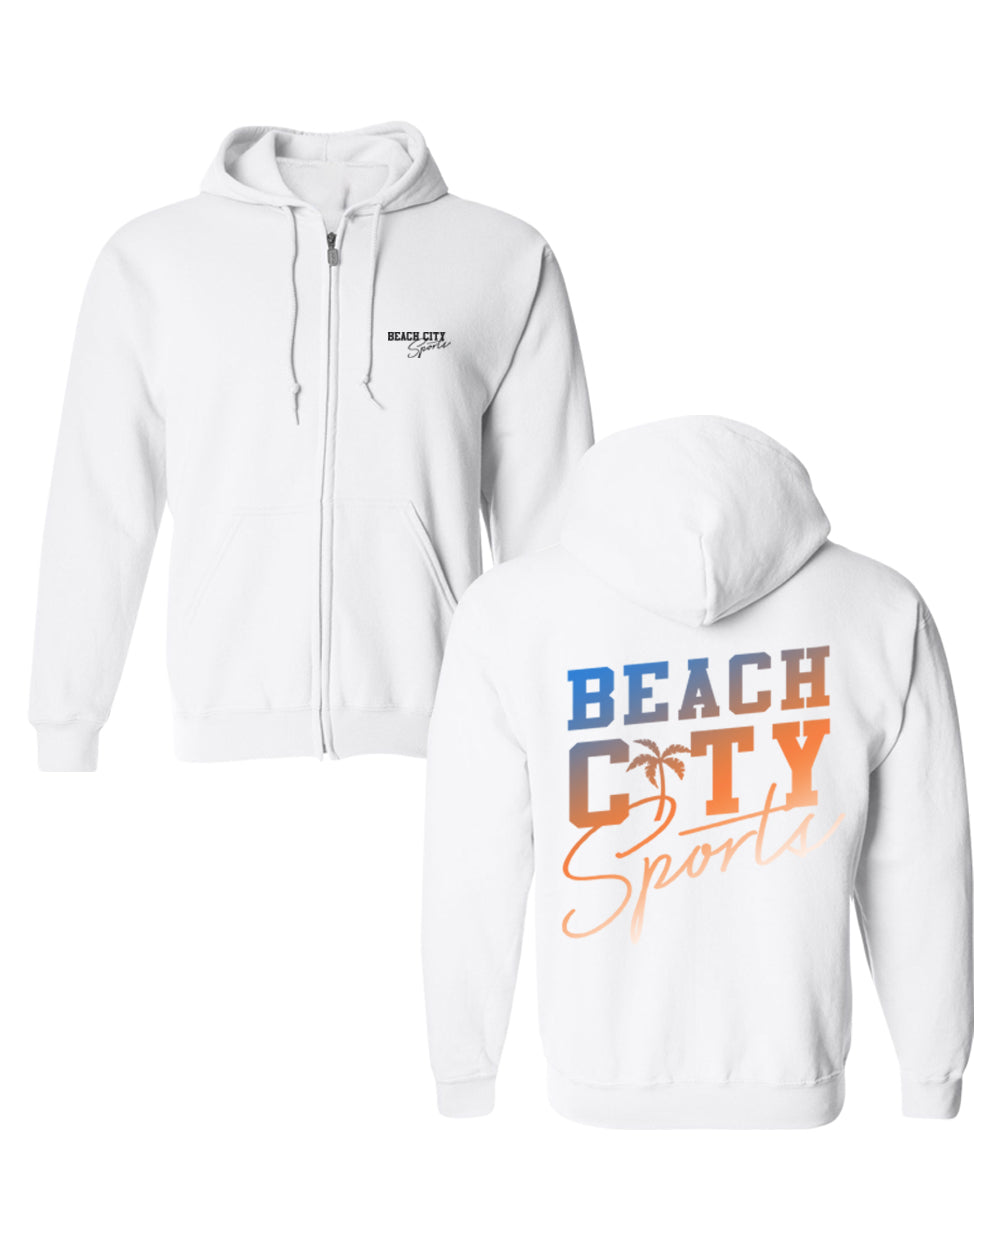 BEACH CITY SPORTS<br>ZIPPER HOODIE<br>(WHITE) - LIMITED EDITION